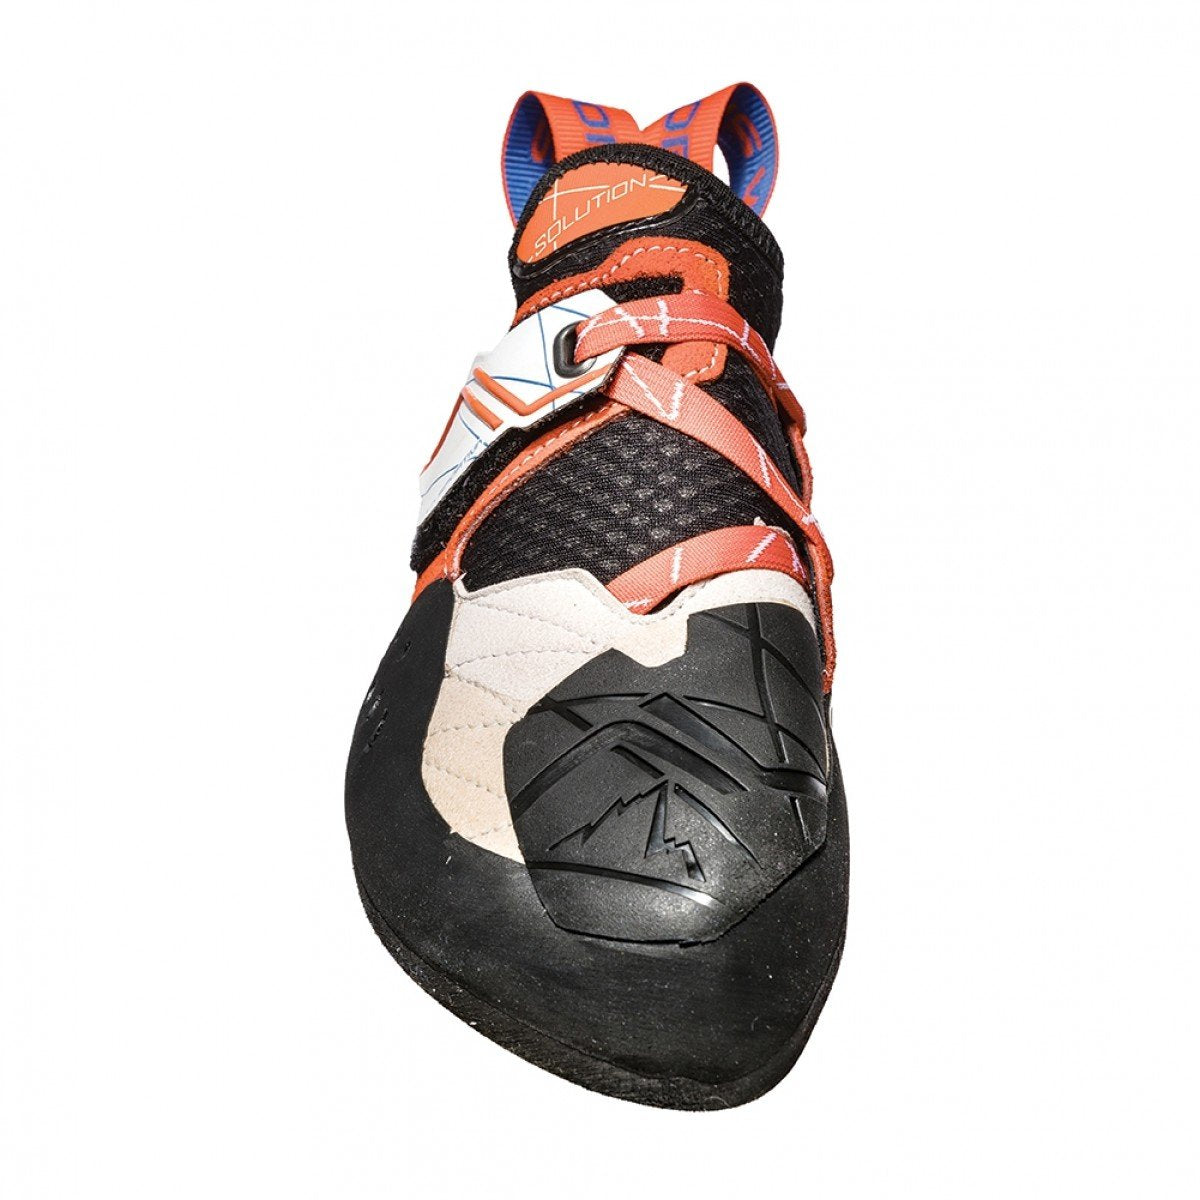 La Sportiva Solution Women's climbing shoe, in black, White and orange colour as seen from the side